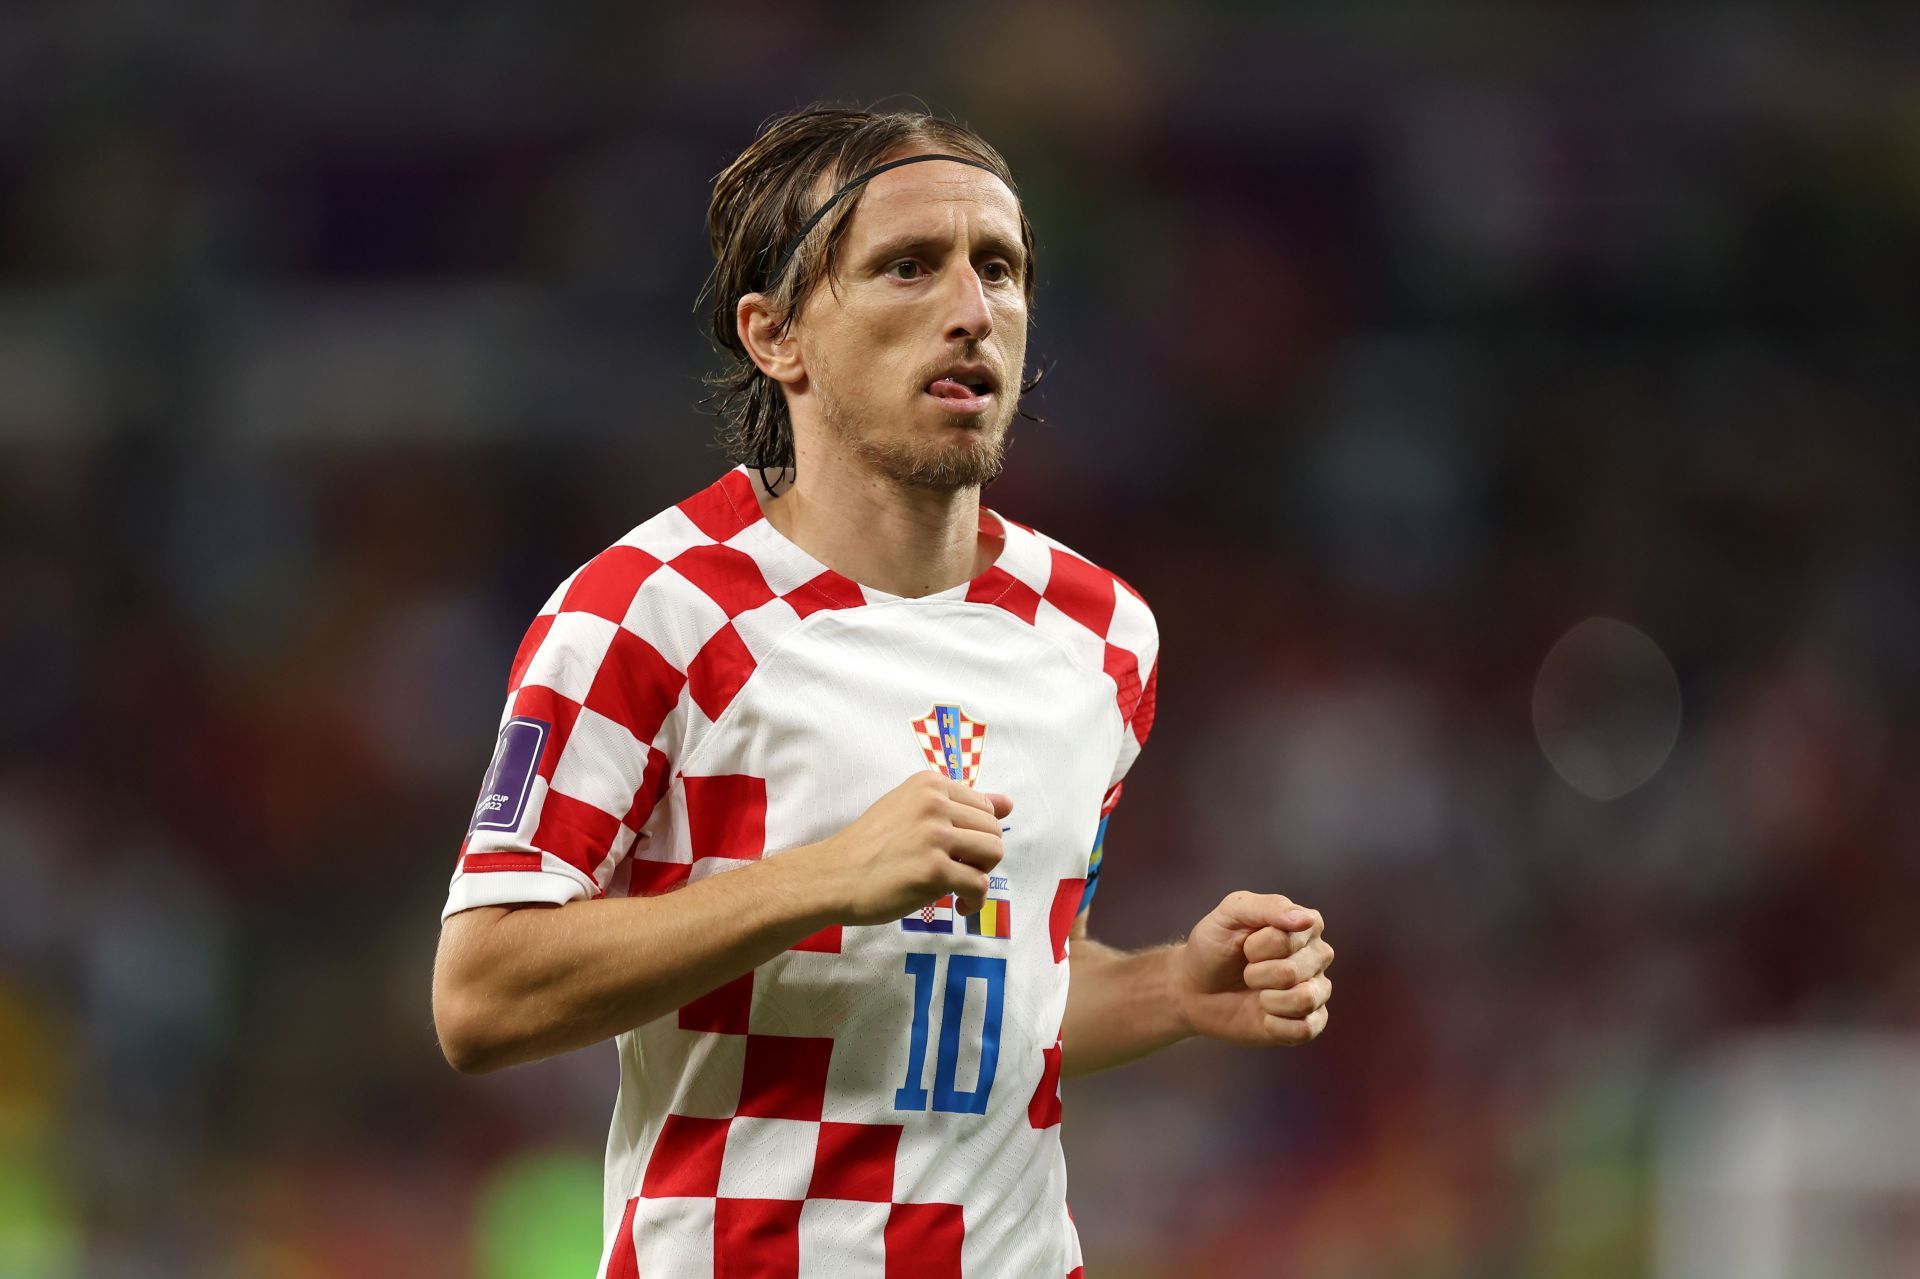 Luka Modric is enjoying a strong outing at the World Cup.